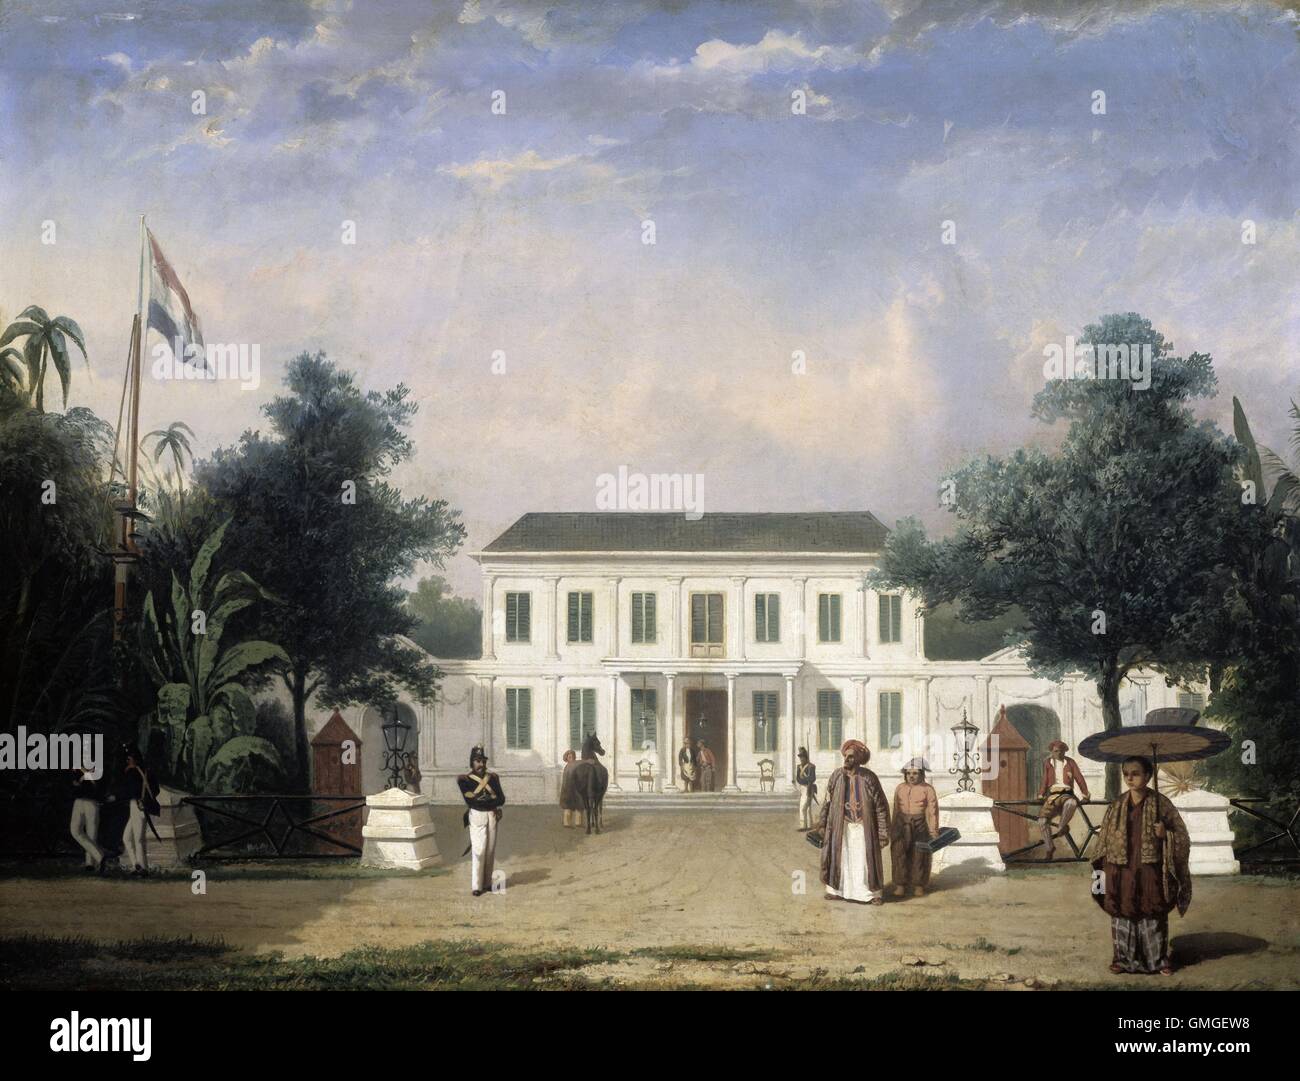 House on the Rijswijk, Batavia (Jalan Veteran), by Ernest Alfred Hardouin, 1835-45, Dutch Colonial painting, oil on canvas. Built by Pieter Tency in 1796. In the foreground is a Javanese woman with pajong, an umbrella used as a distinctive sign for offici (BSLOC 2016 6 258) Stock Photo